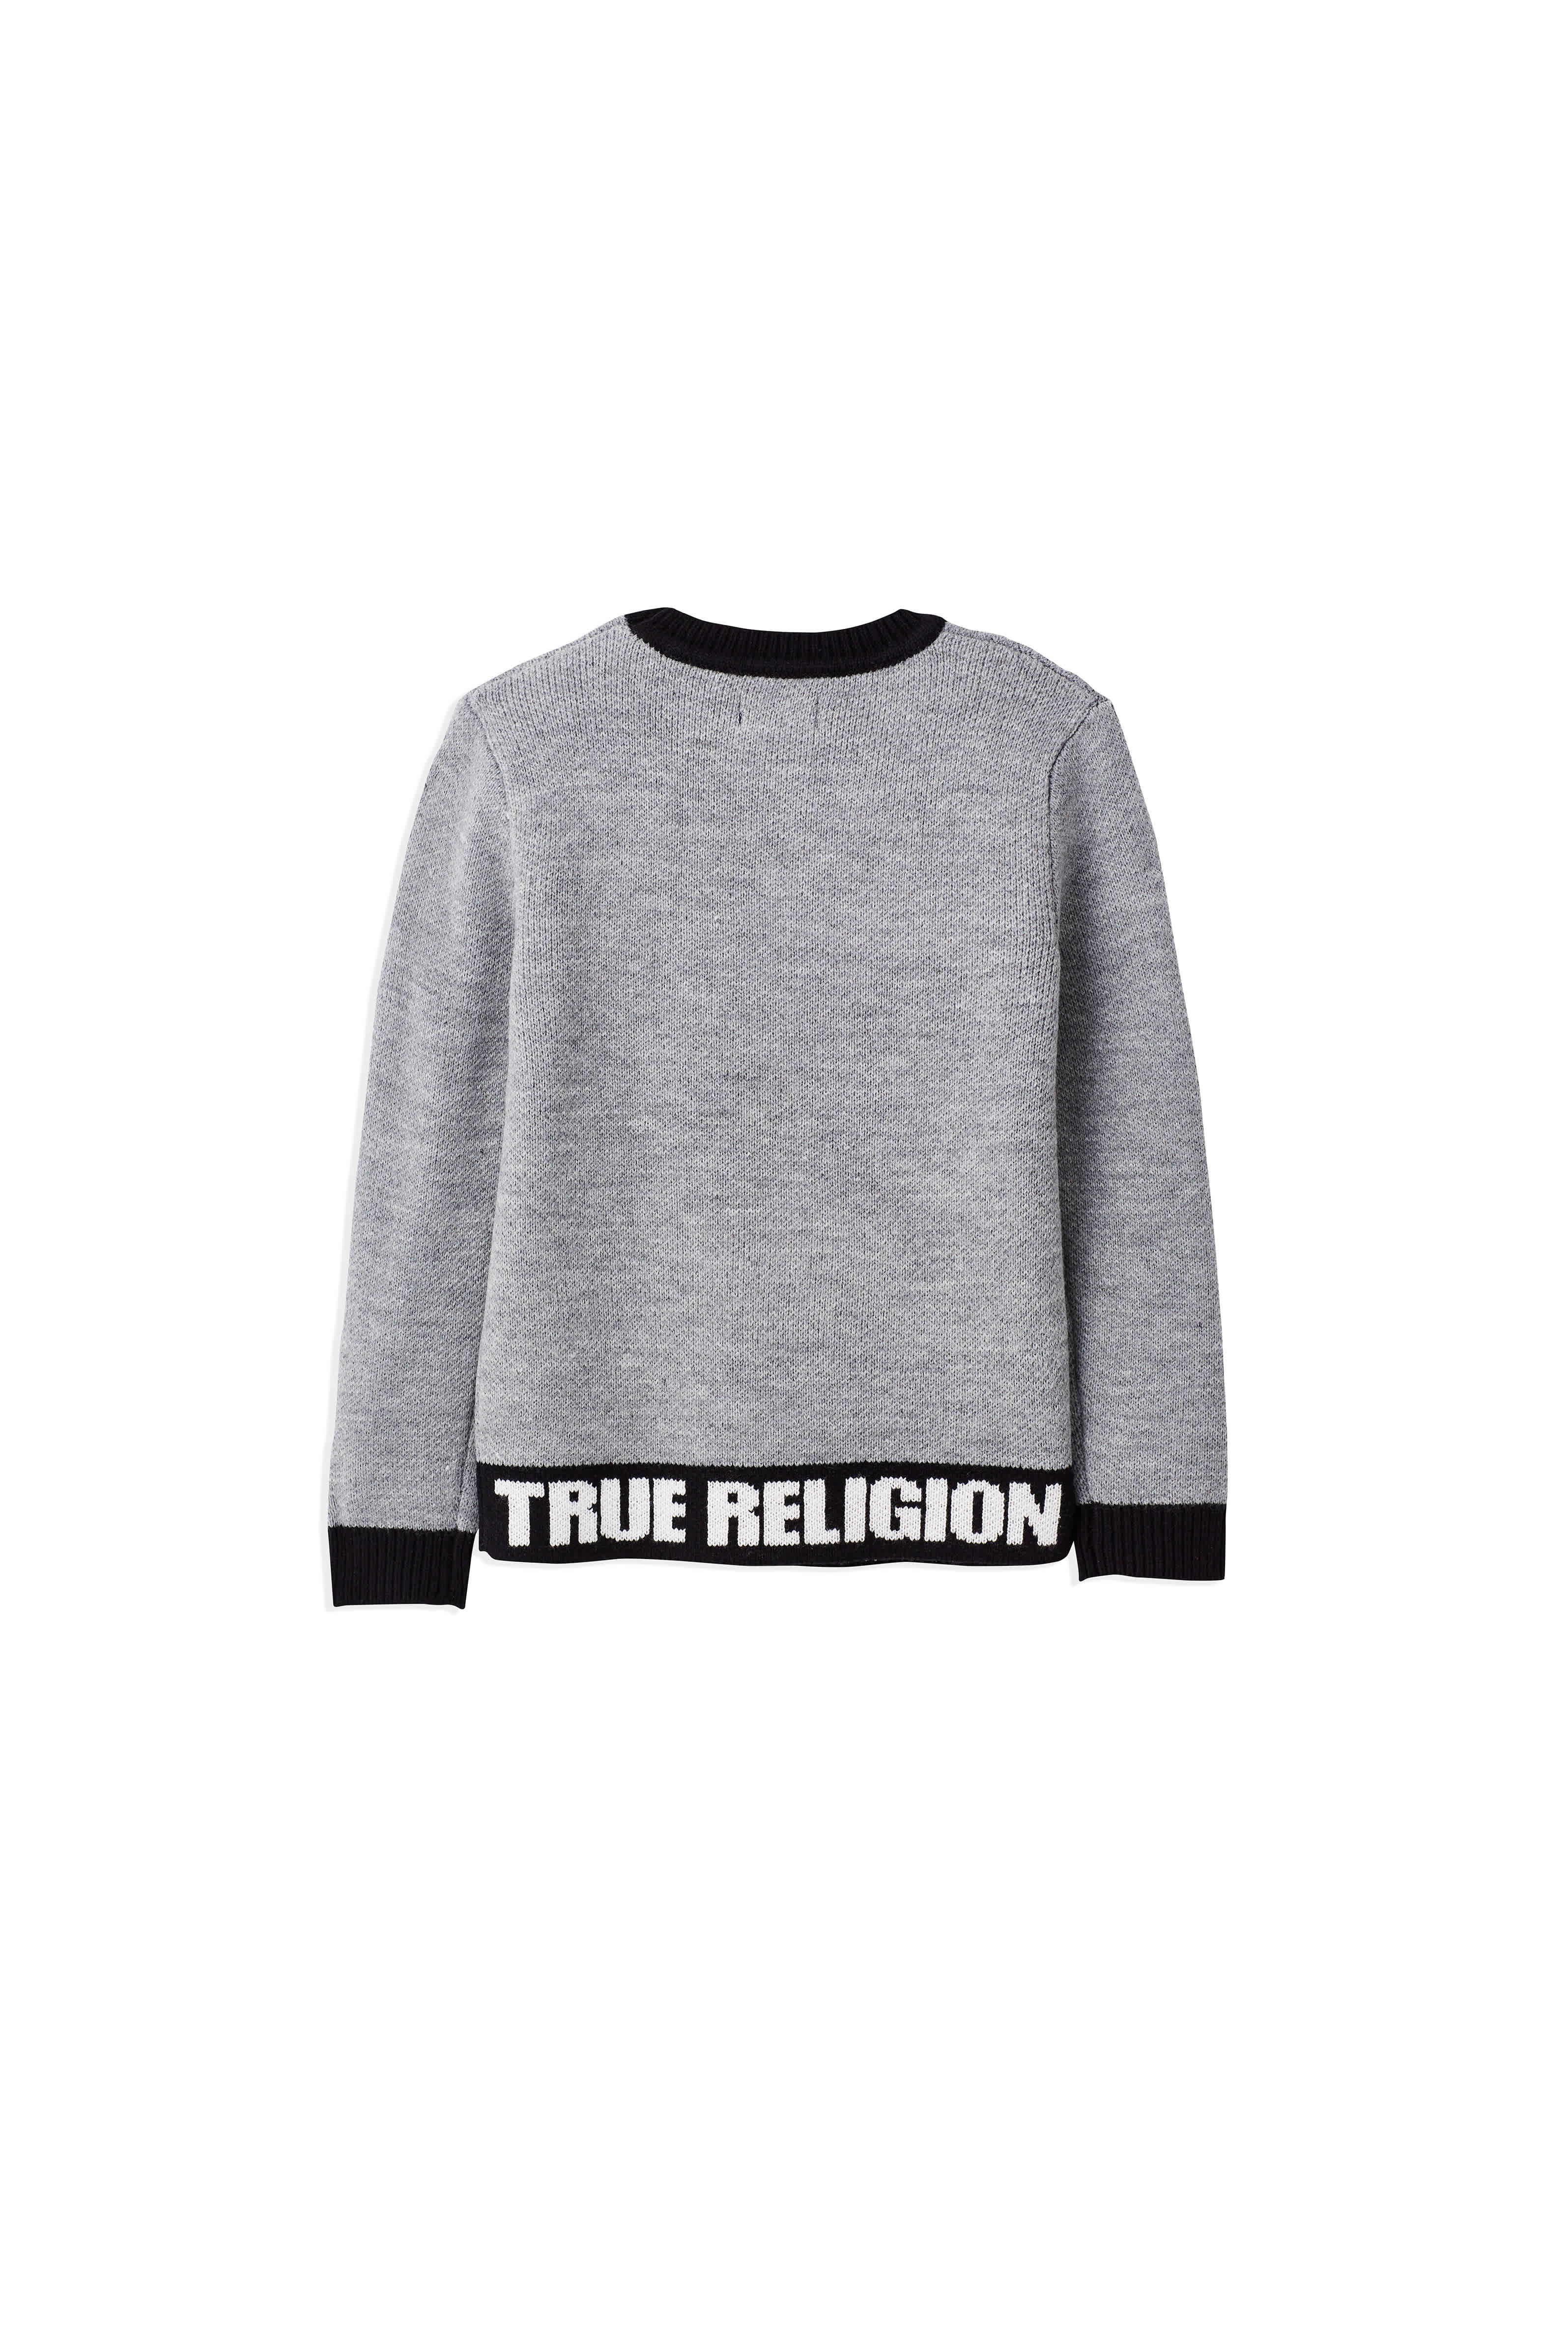 TR PULLOVER KIDS SWEATER